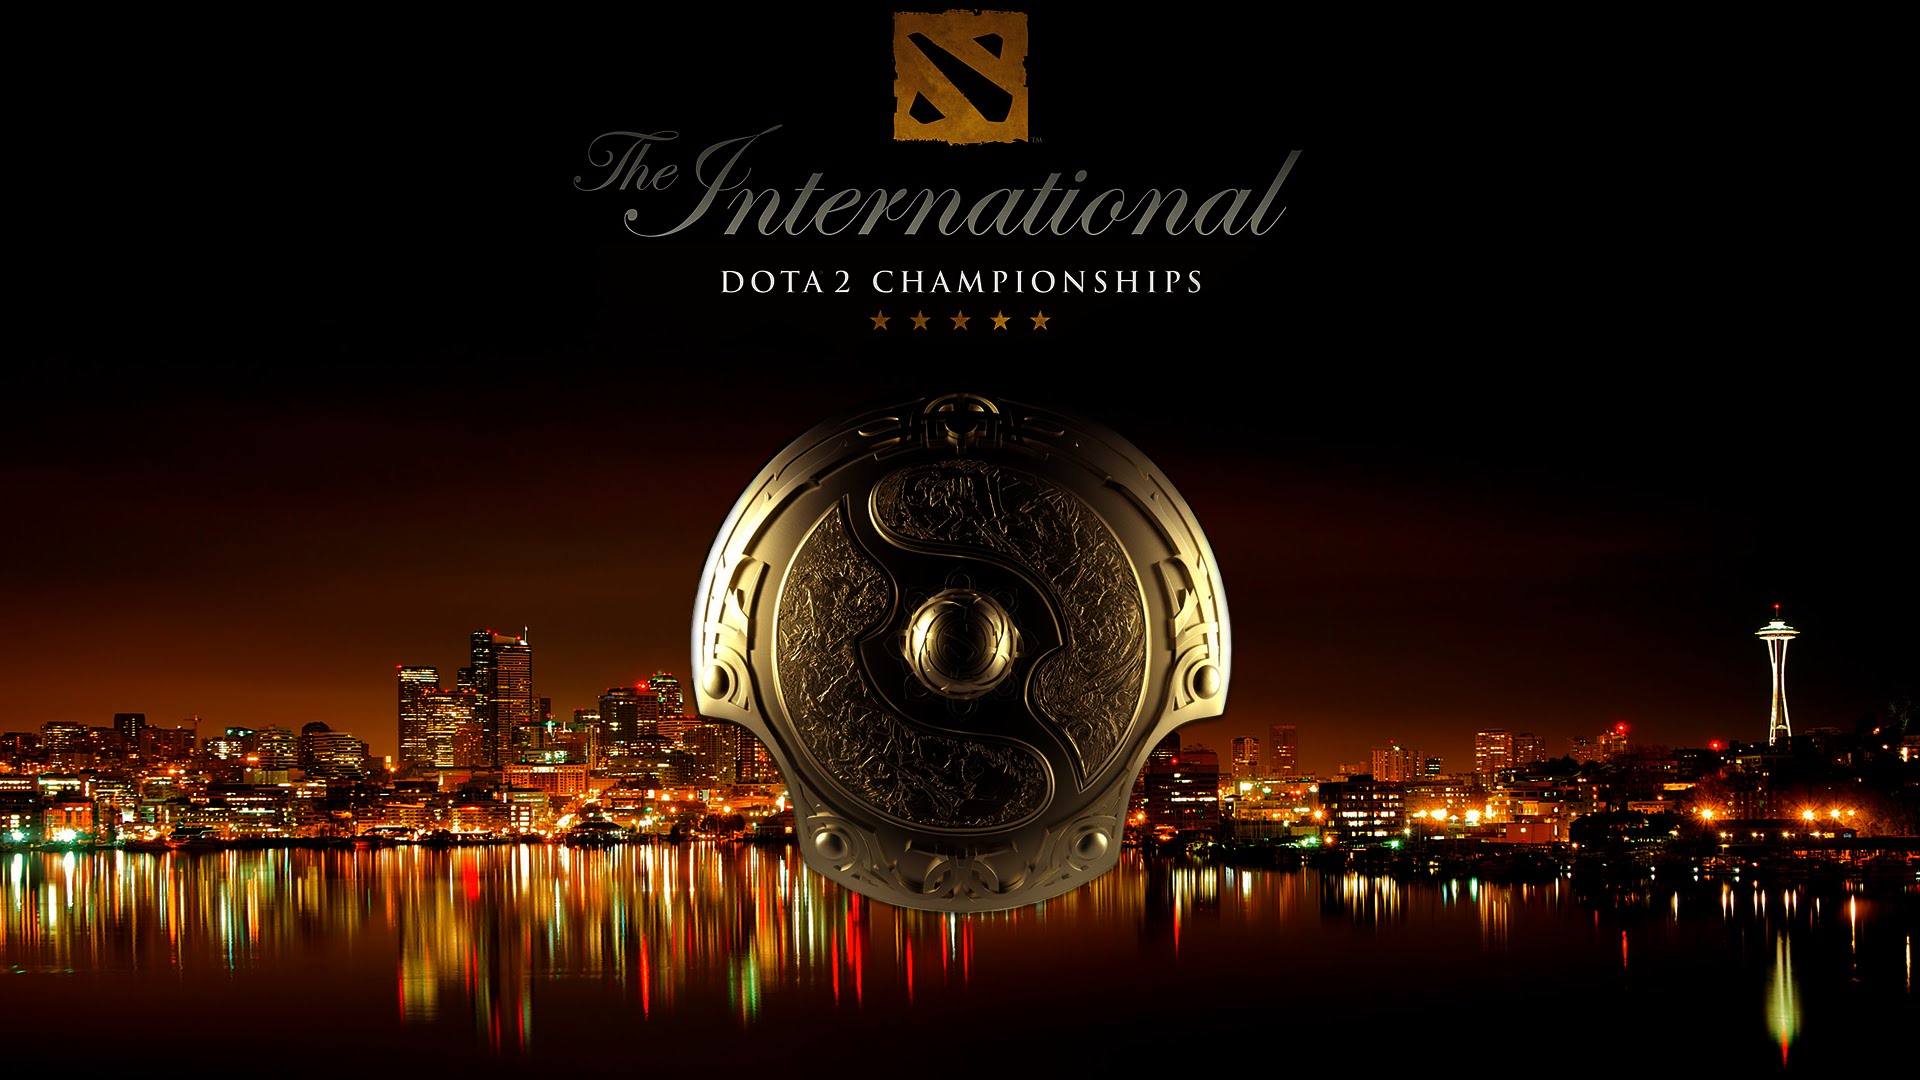 DOTA 2s The International Allows Valve to Test New Live Streaming Service